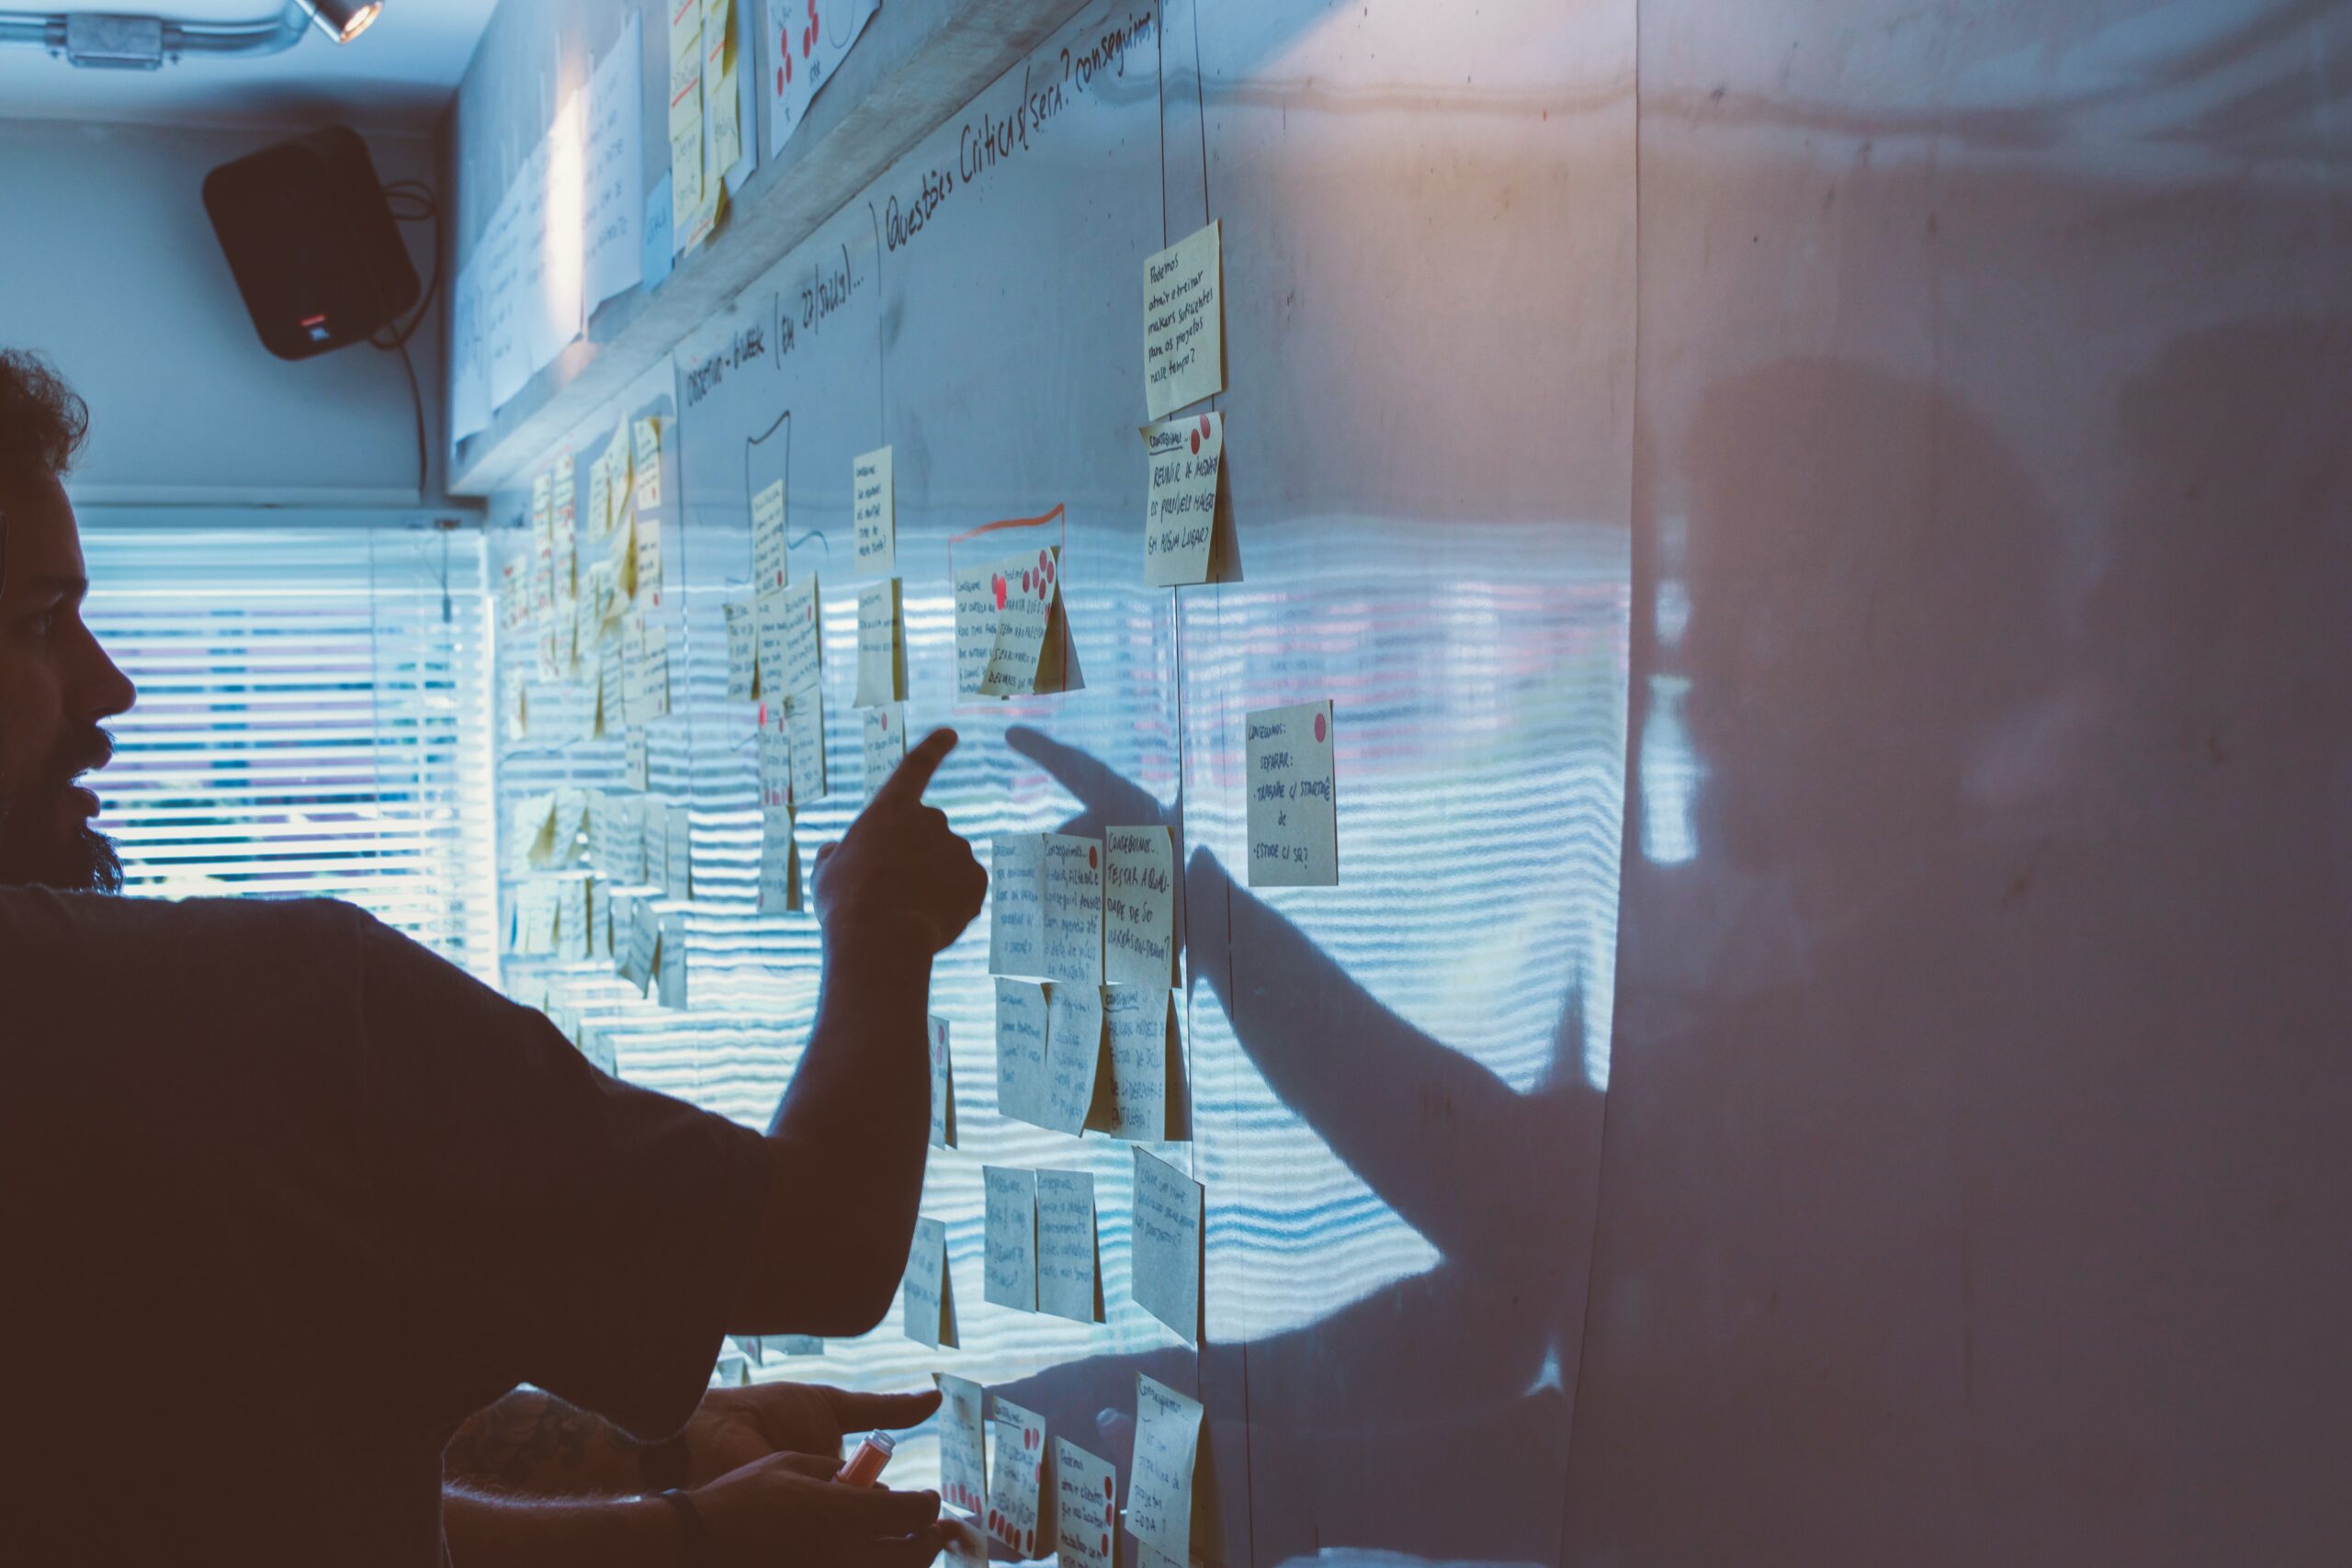 Man pointing to sticky notes on a white-board – representing employee engagement strategy in a small business. Image by Startae Team on Unsplash.